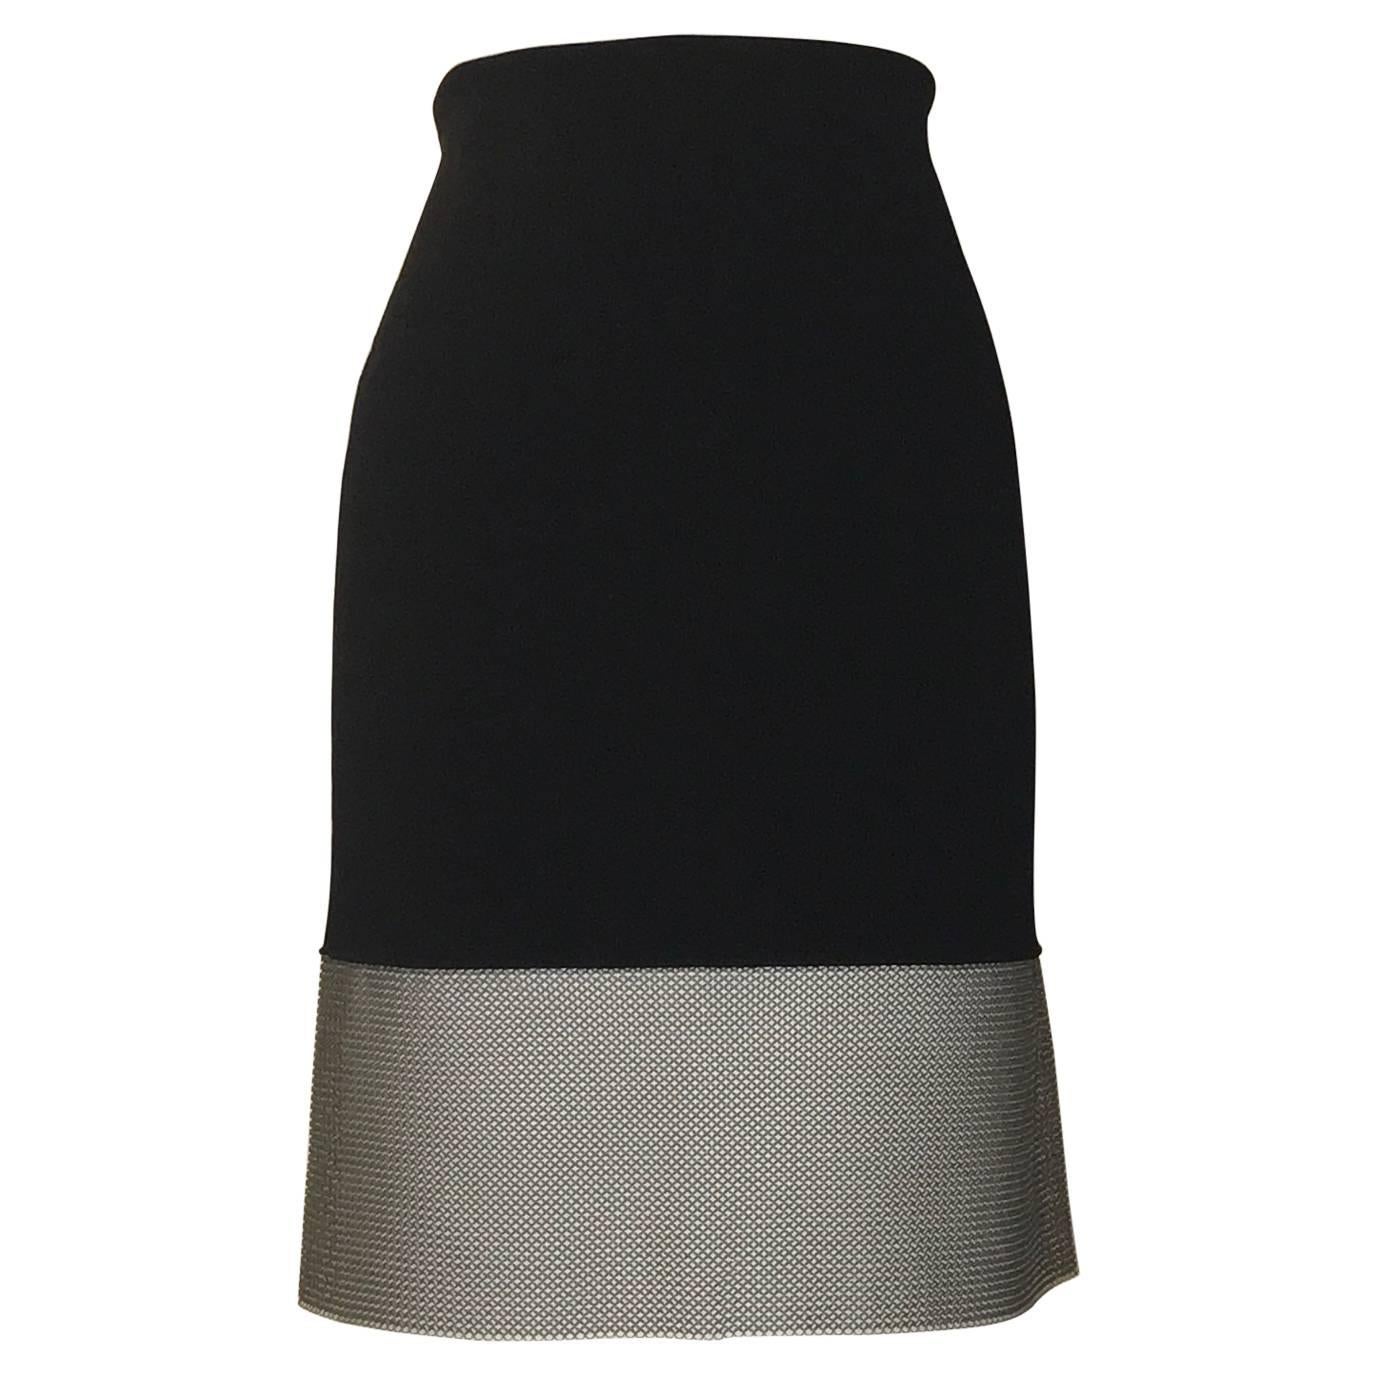 Paco Rabanne Black Knit Bodycon Pencil Skirt with Silver Mesh Chainmail Trim